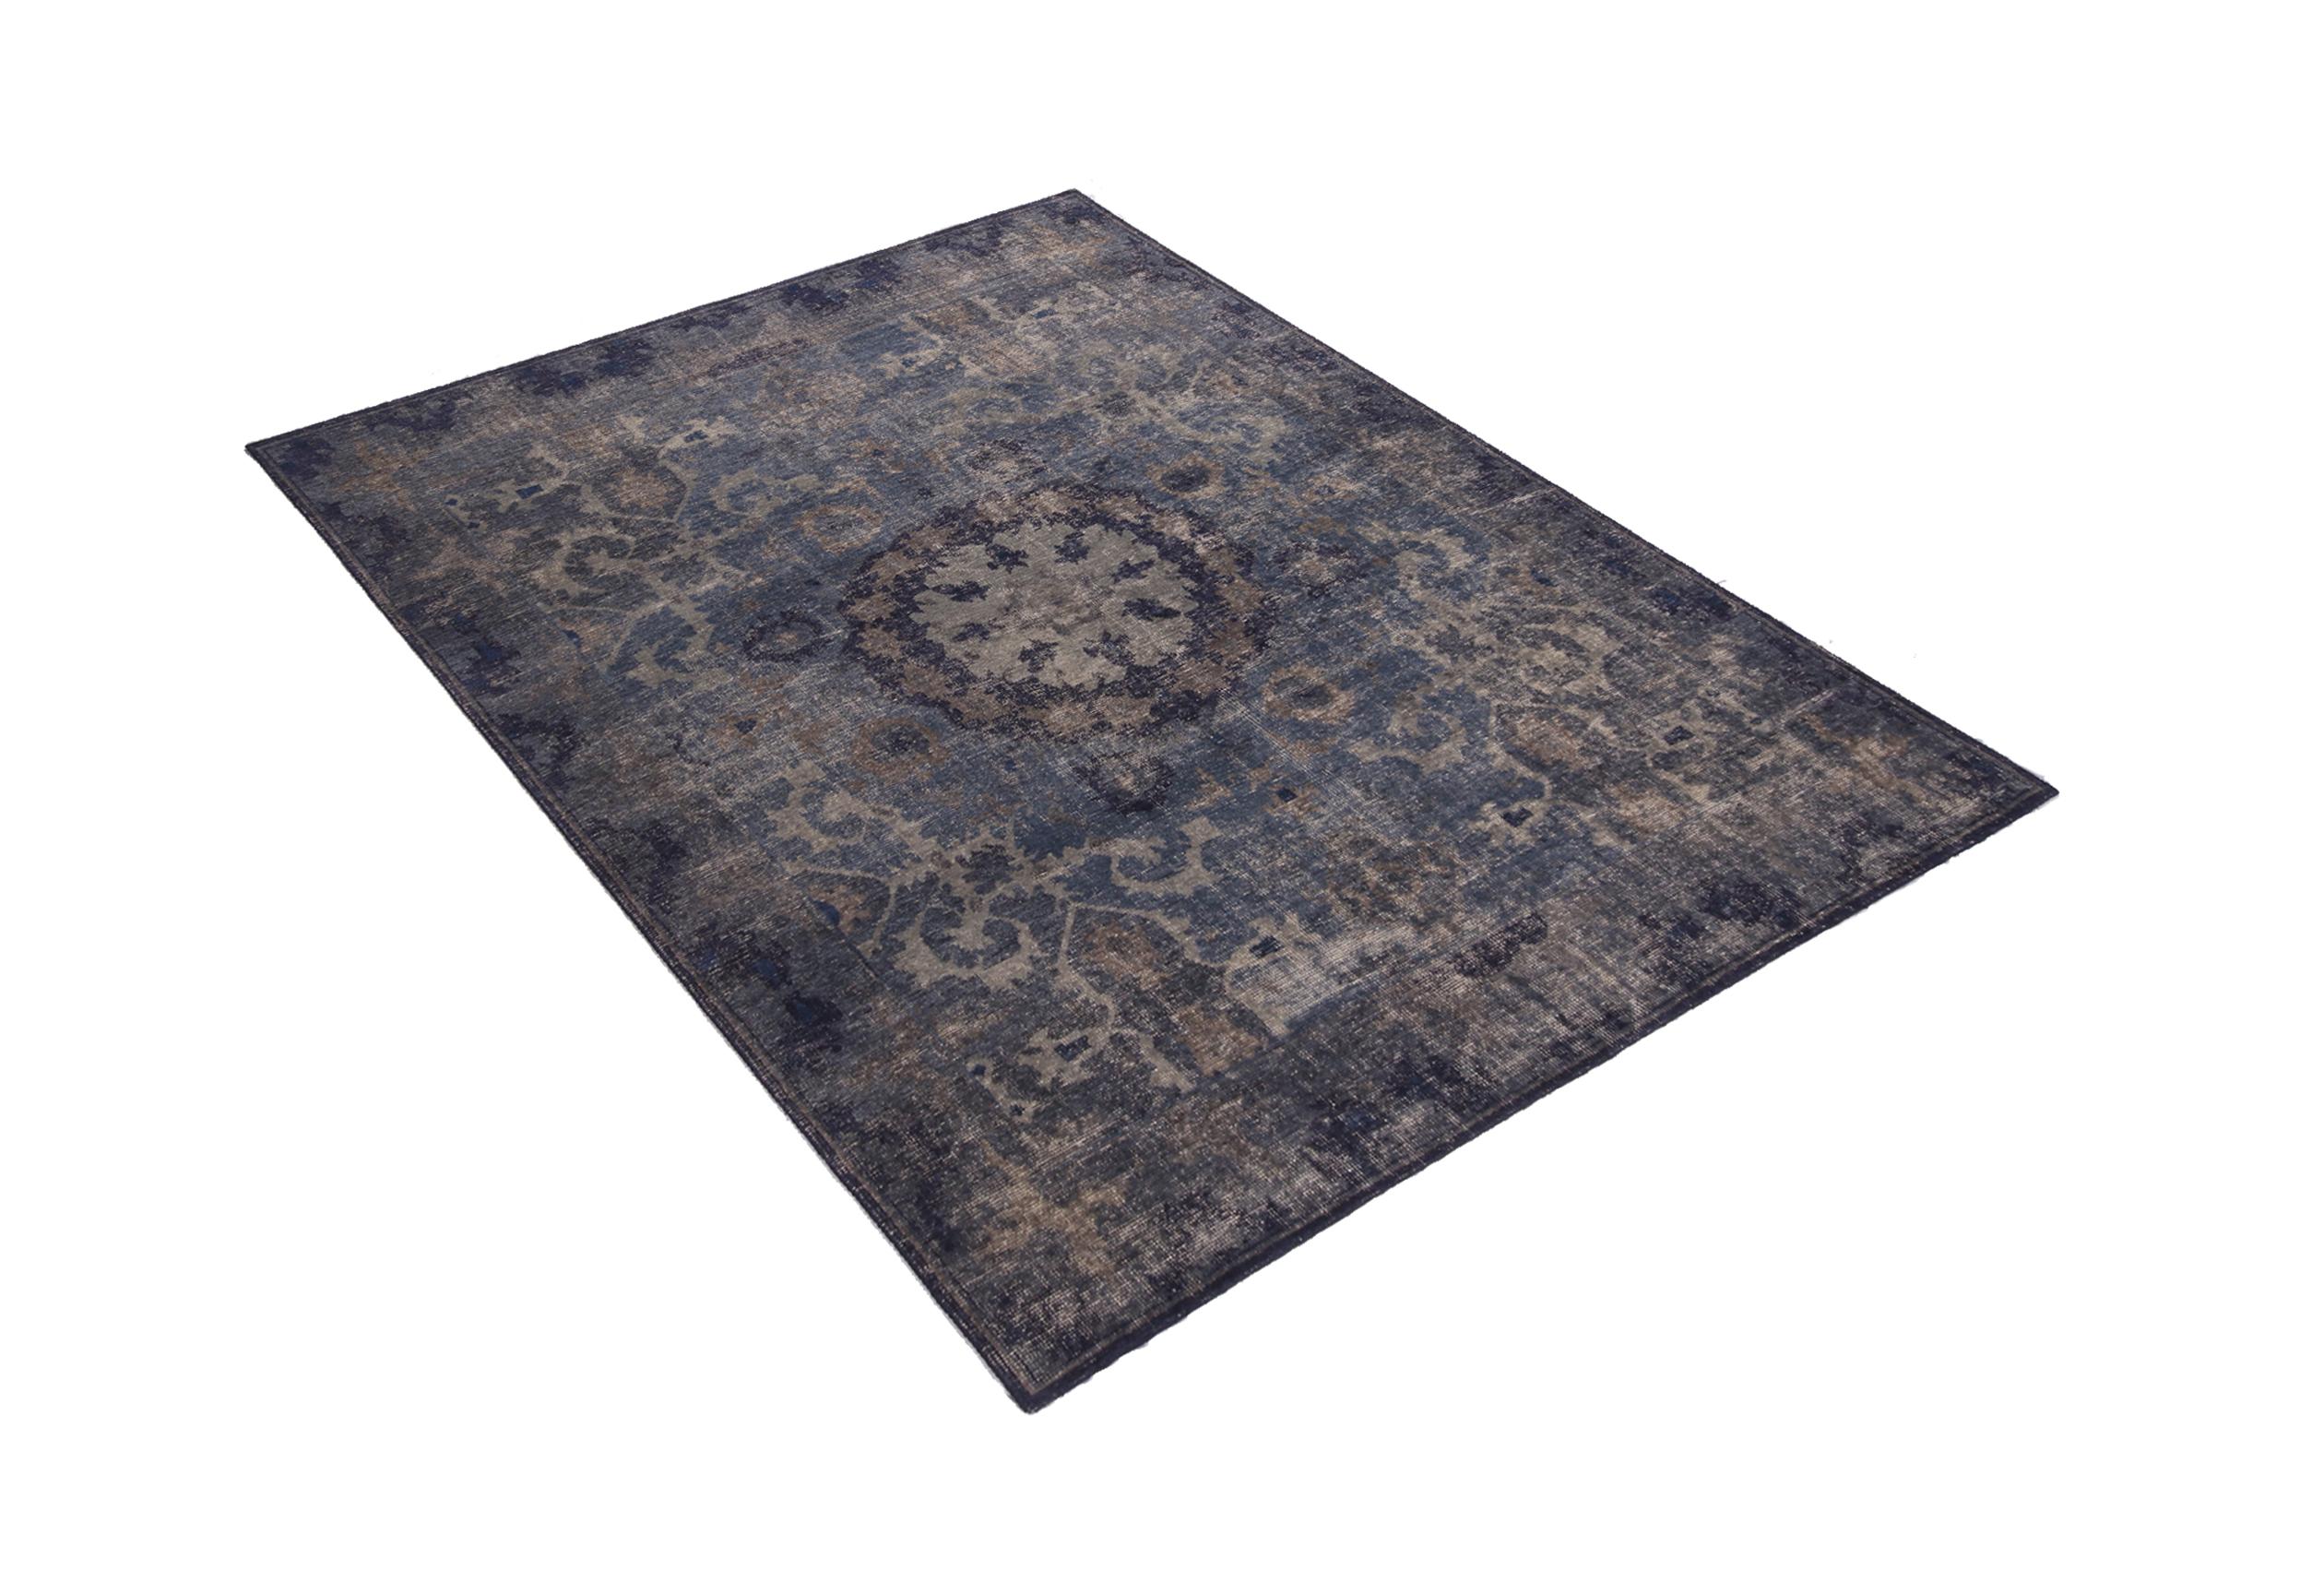 This contemporary hand knotted wool rug hails from Rug & Kilim’s Homage Collection, enjoying a finer take on distressed shabby chic aesthetic with fewer knots per square inch. The very Industrial navy and smoke blue colorways accent a variety of